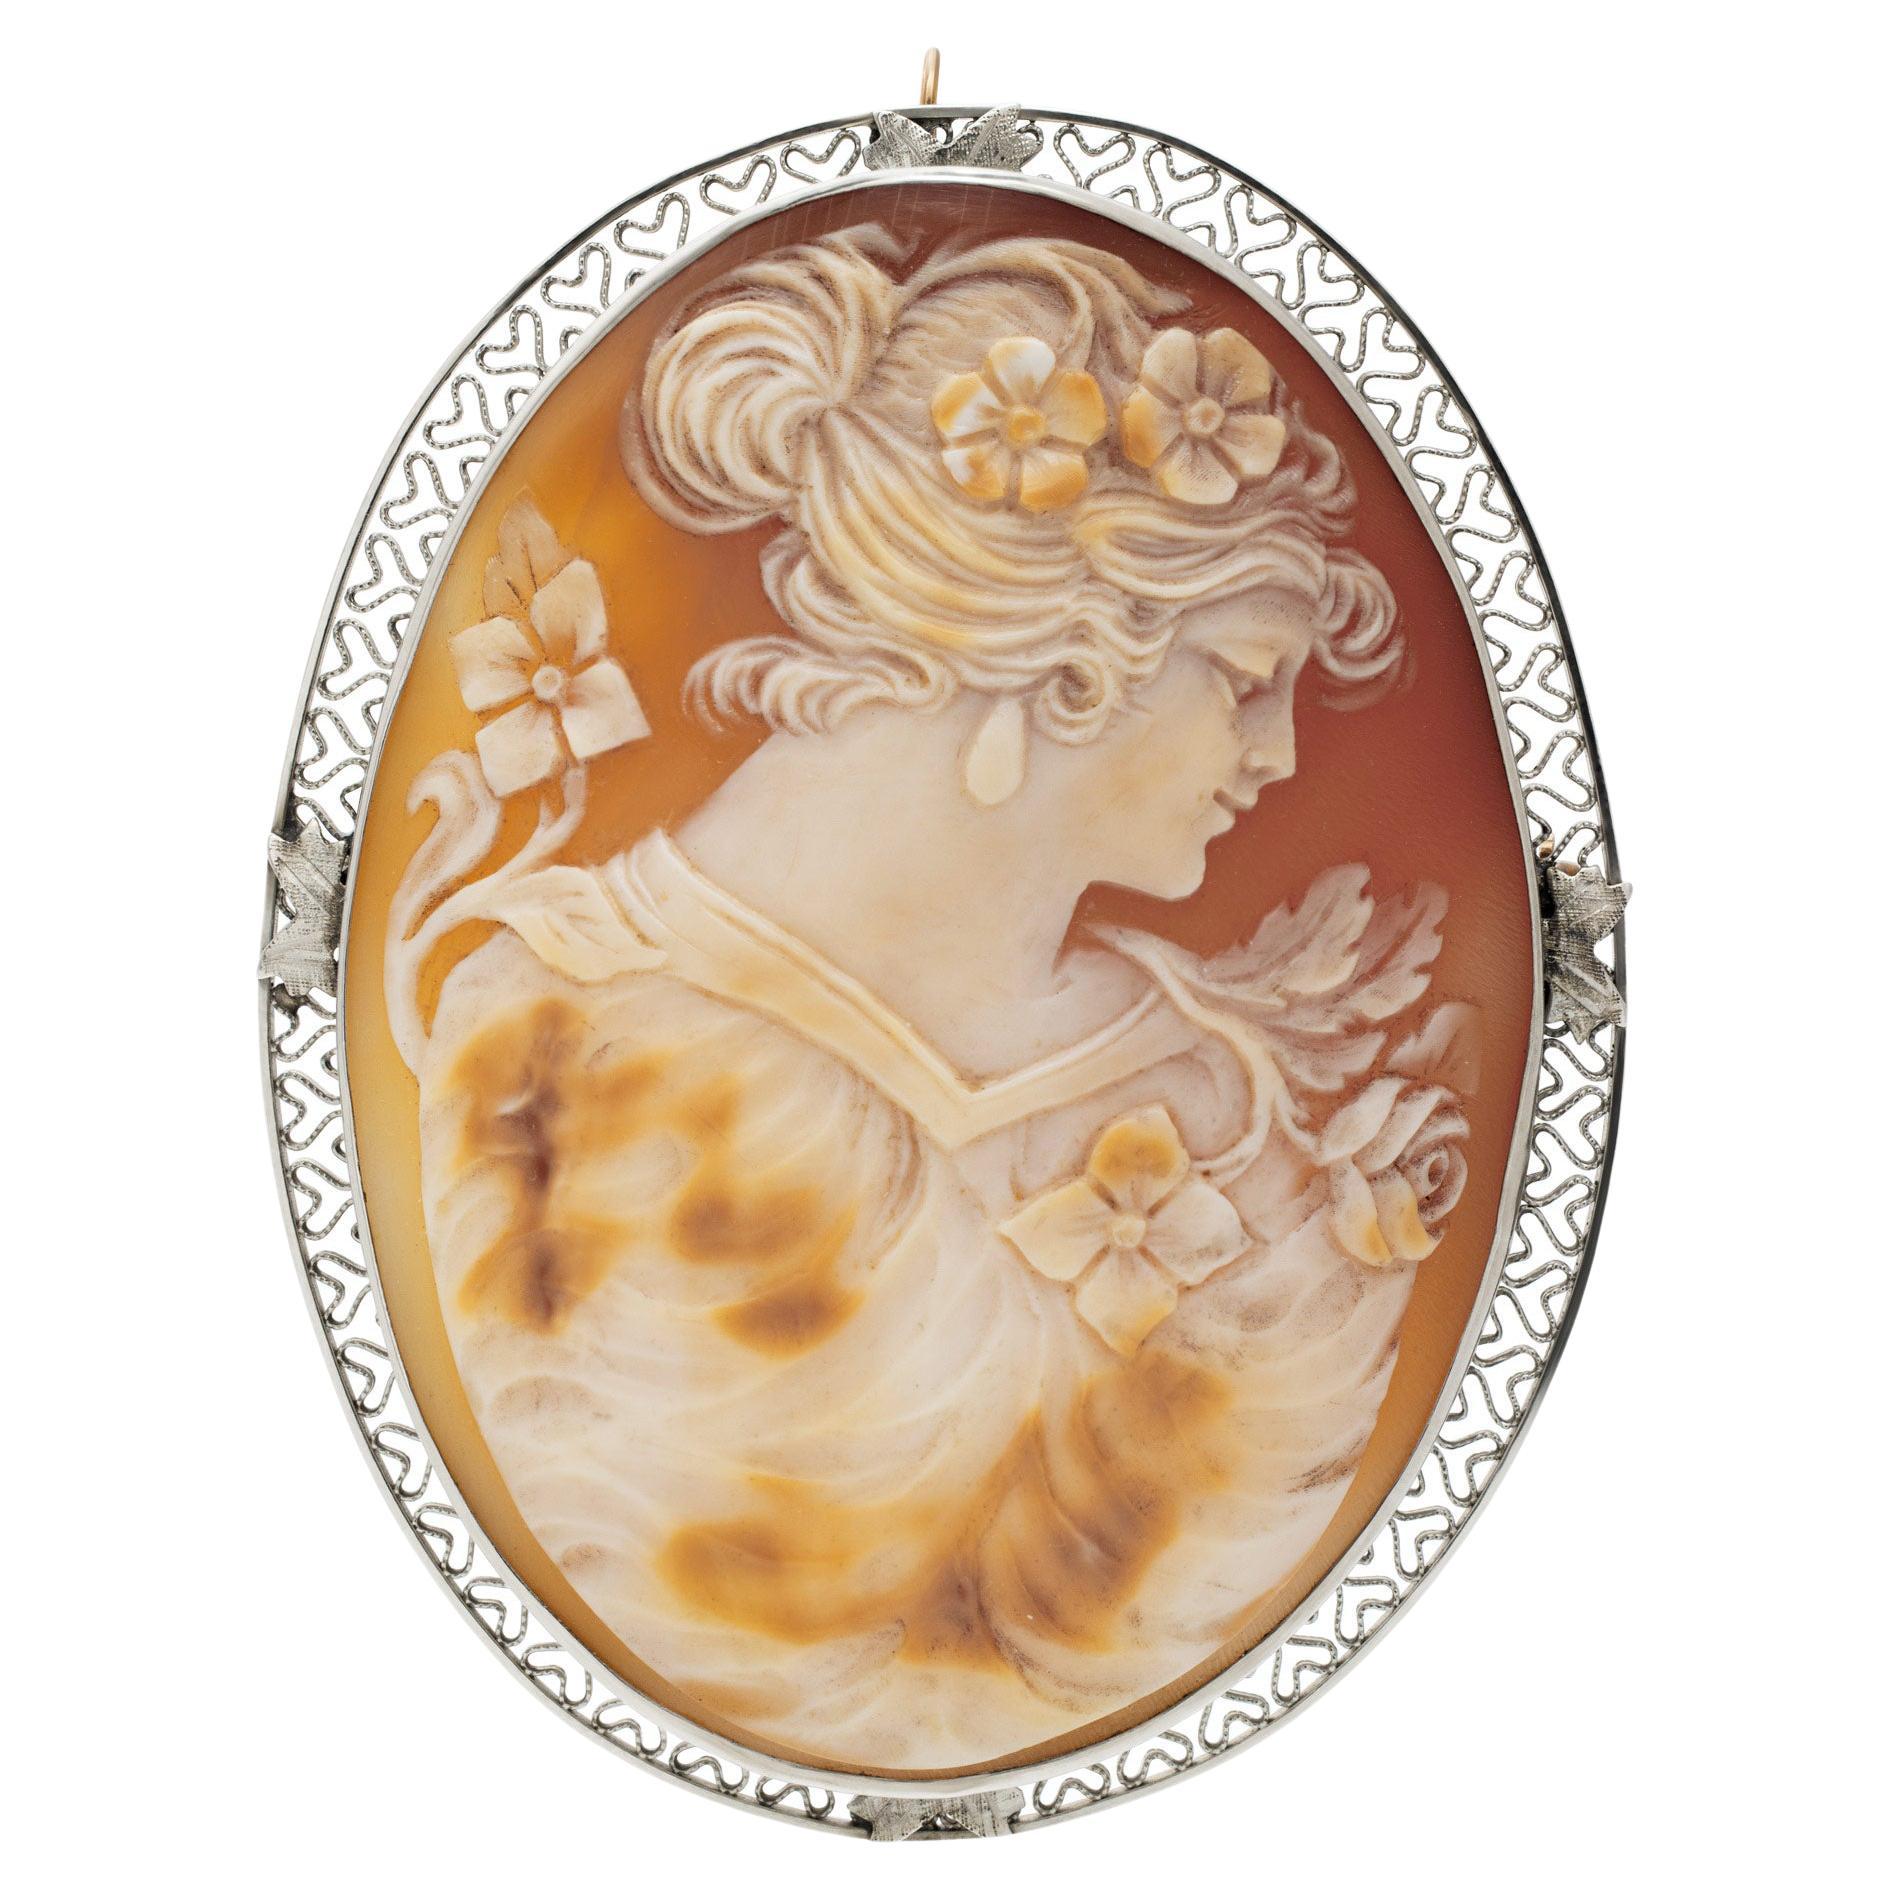 Cameo Broach in 14k White Gold with an Intricate Design